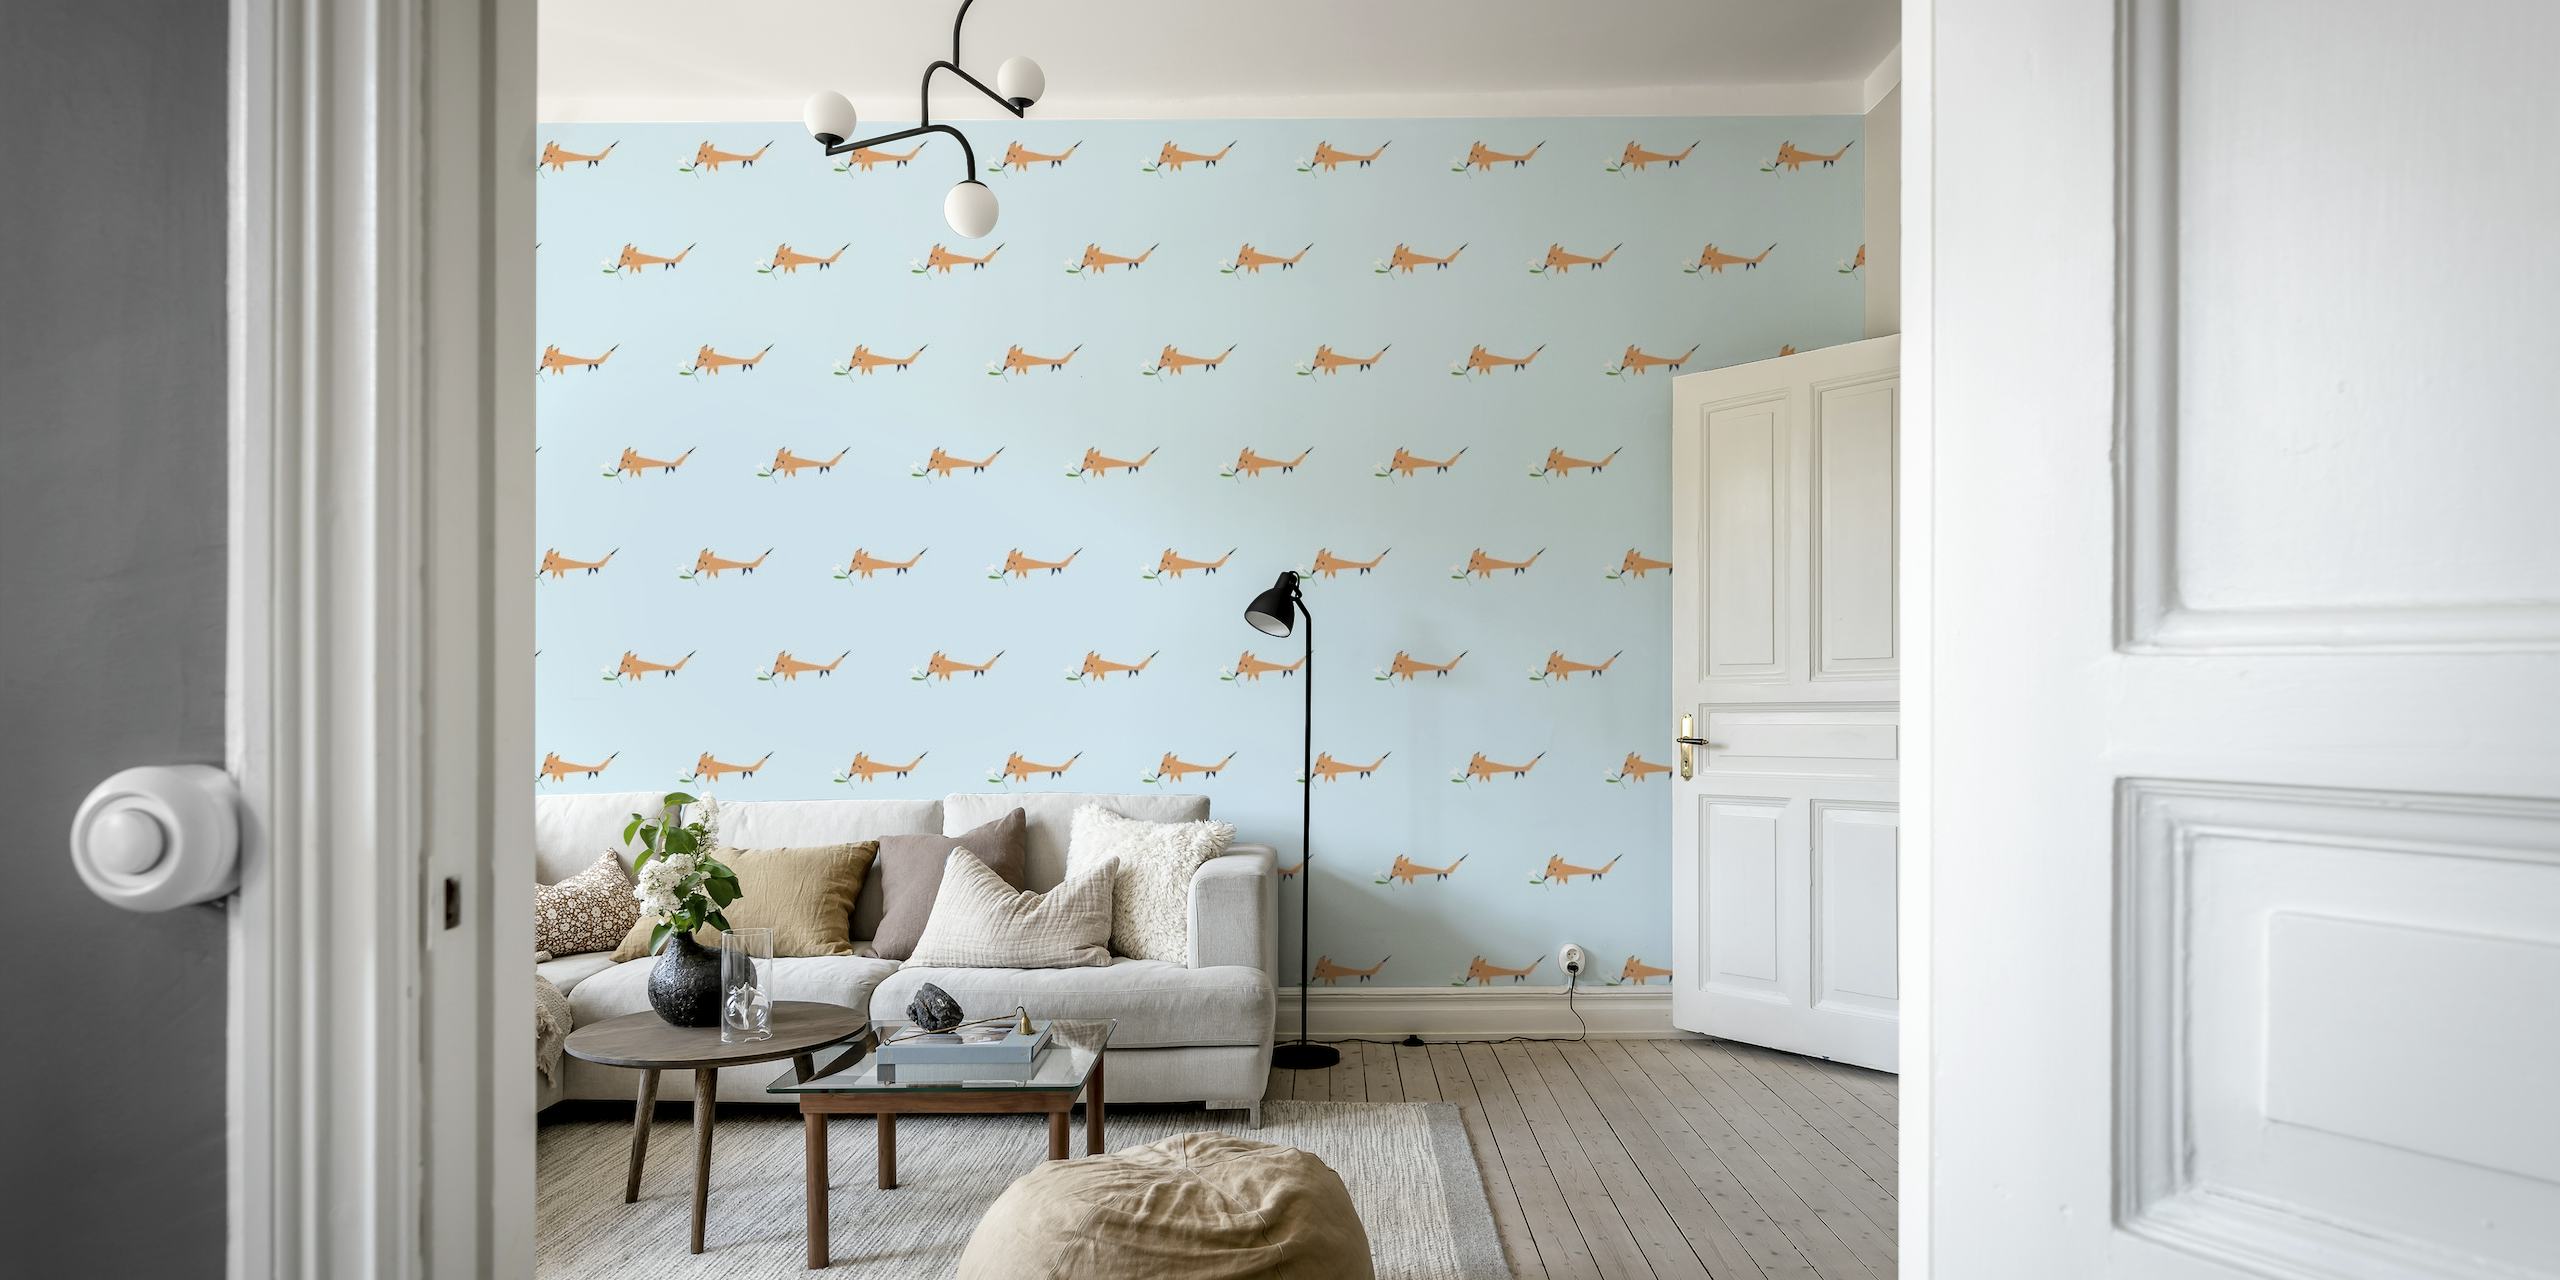 Little foxes wall mural with orange foxes on a pale blue background